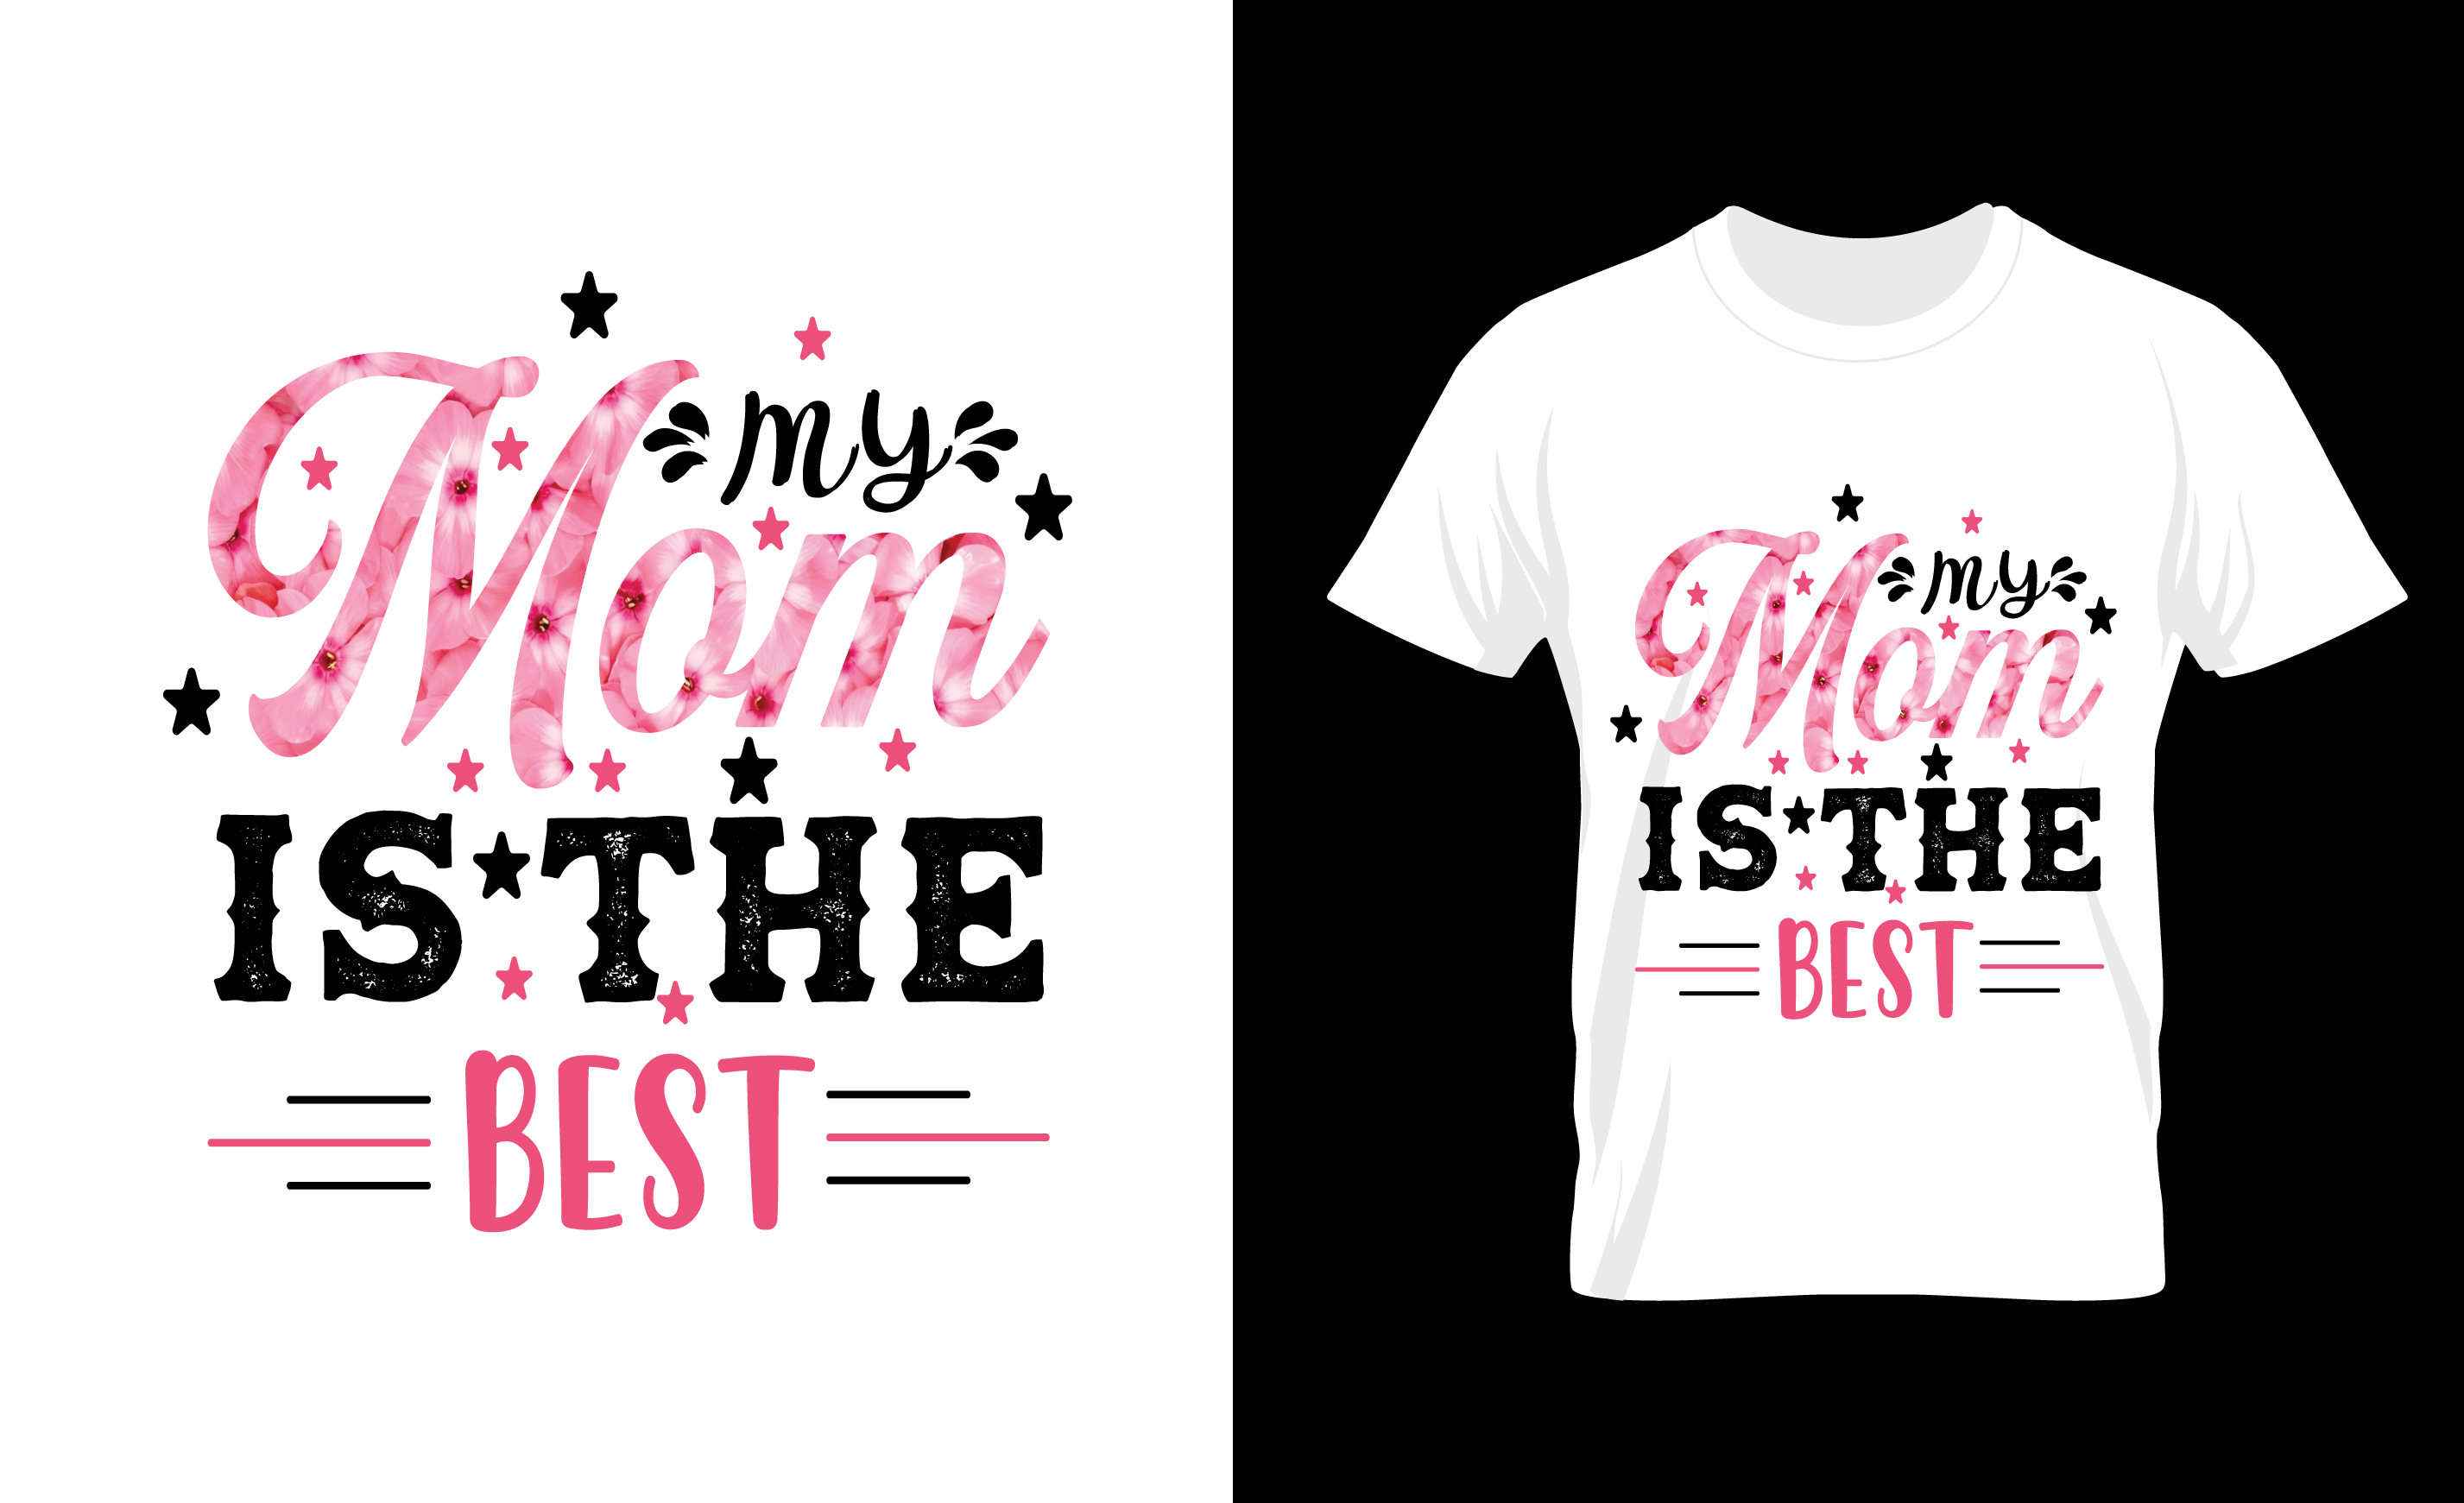 Image of a white t-shirt with a wonderful print in black and pink about mom.